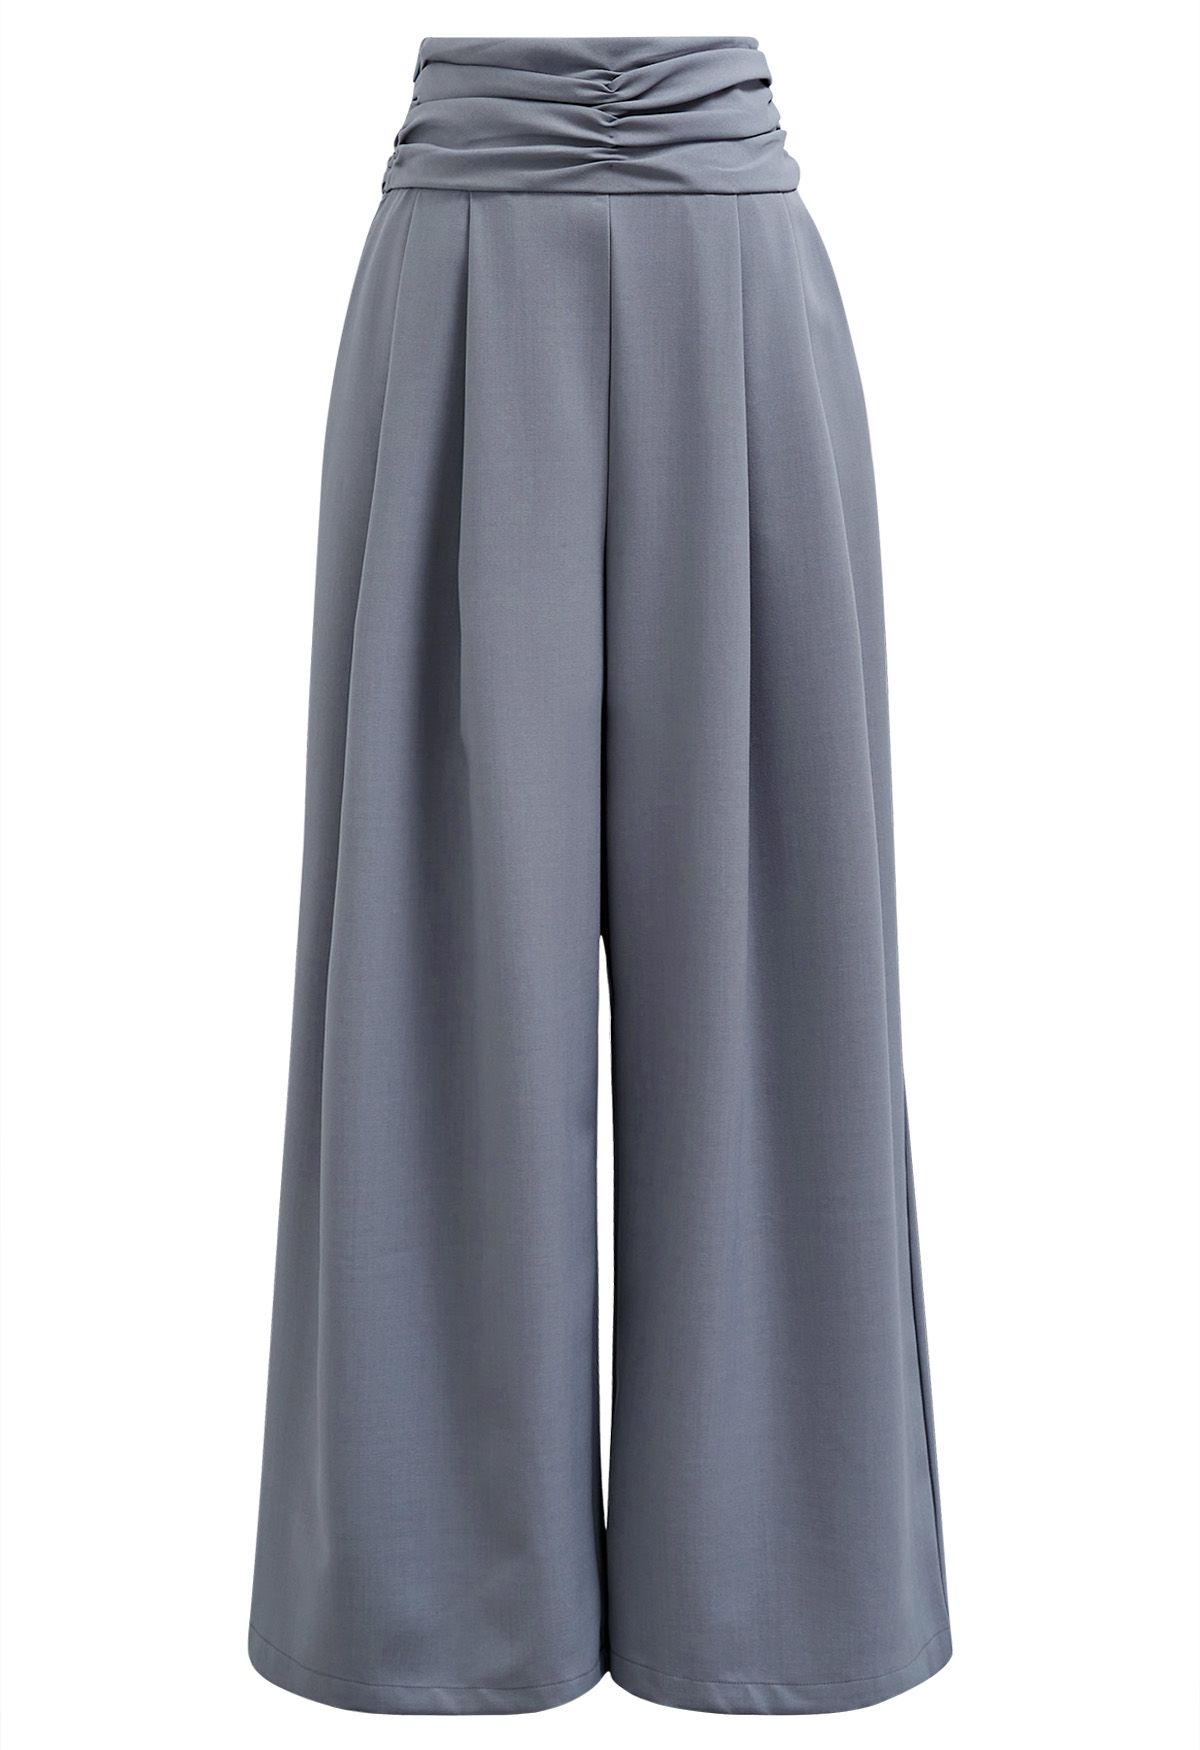 Bowknot High Waist Wide-Leg Pants in Lilac - Retro, Indie and Unique Fashion